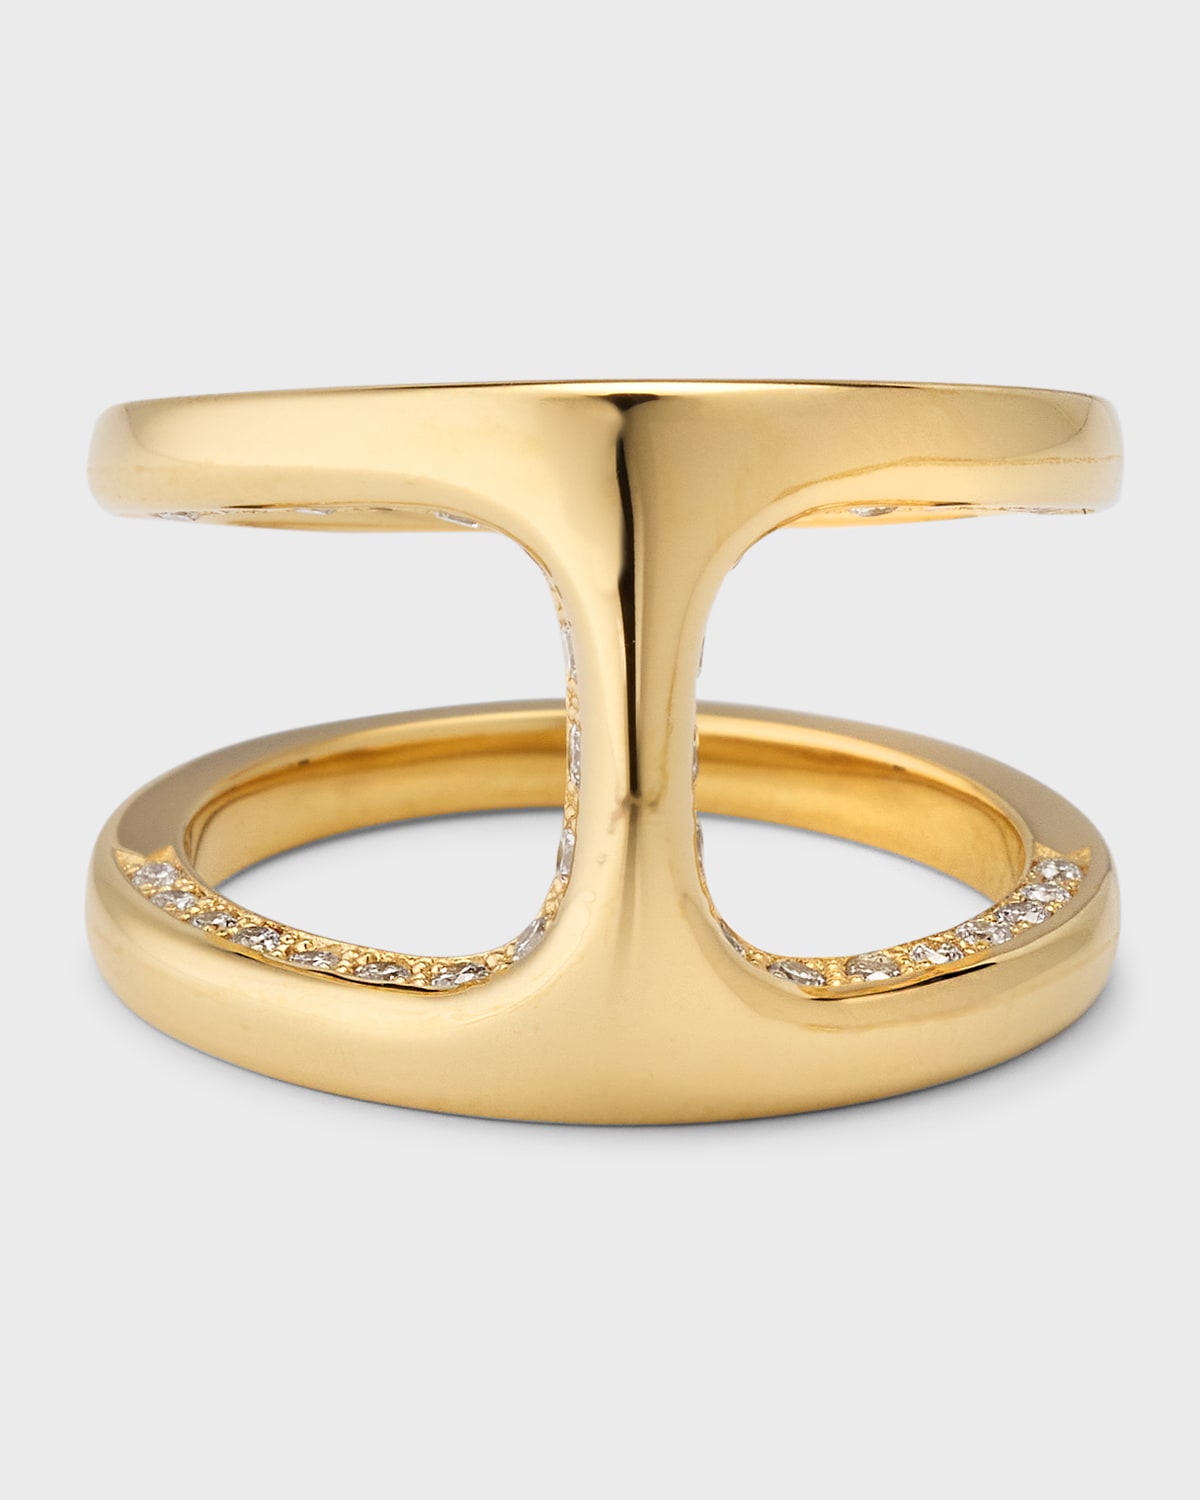 18K Yellow Gold Dame Phantom Ring with Flooded Diamonds, Size 8